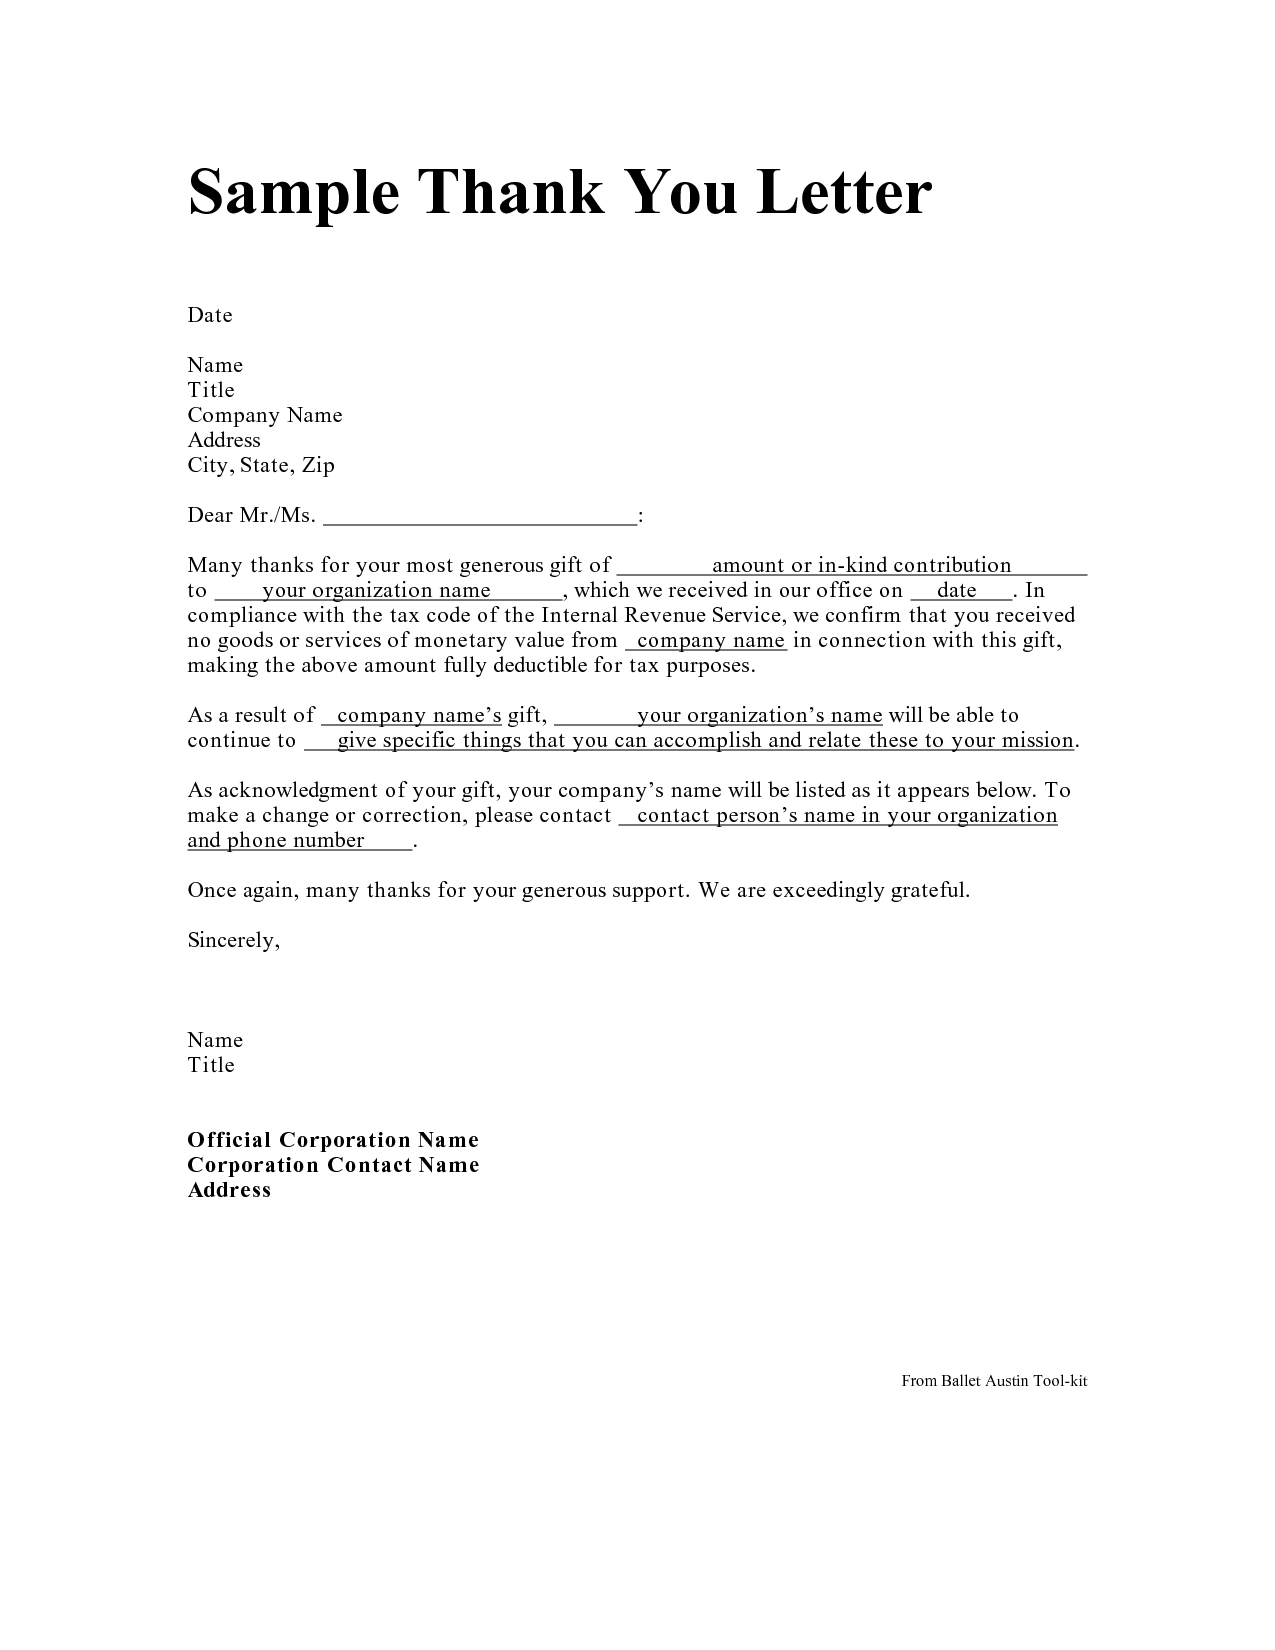 thank you letter business template example-Personal Thank You Letter Personal Thank You Letter Samples Writing Thank You Notes Thank You Note Examples 8-m